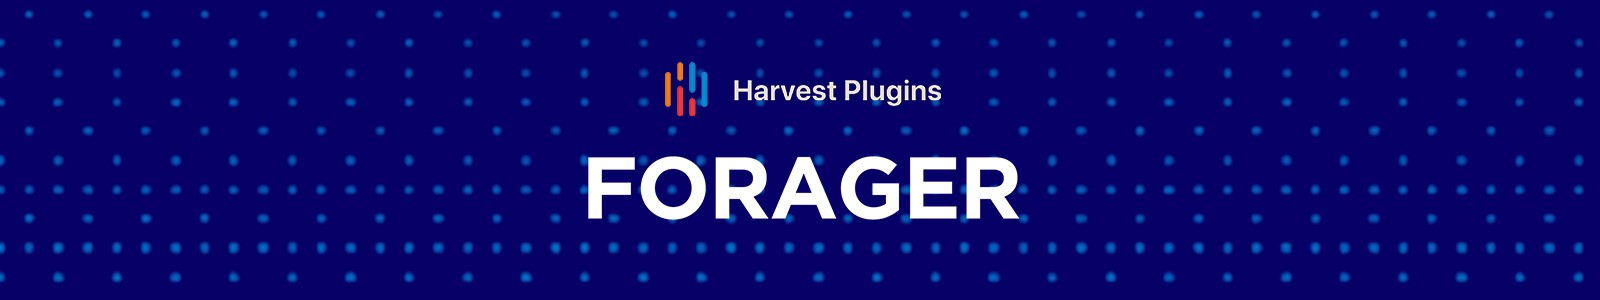 Forager by Harvest Plugins